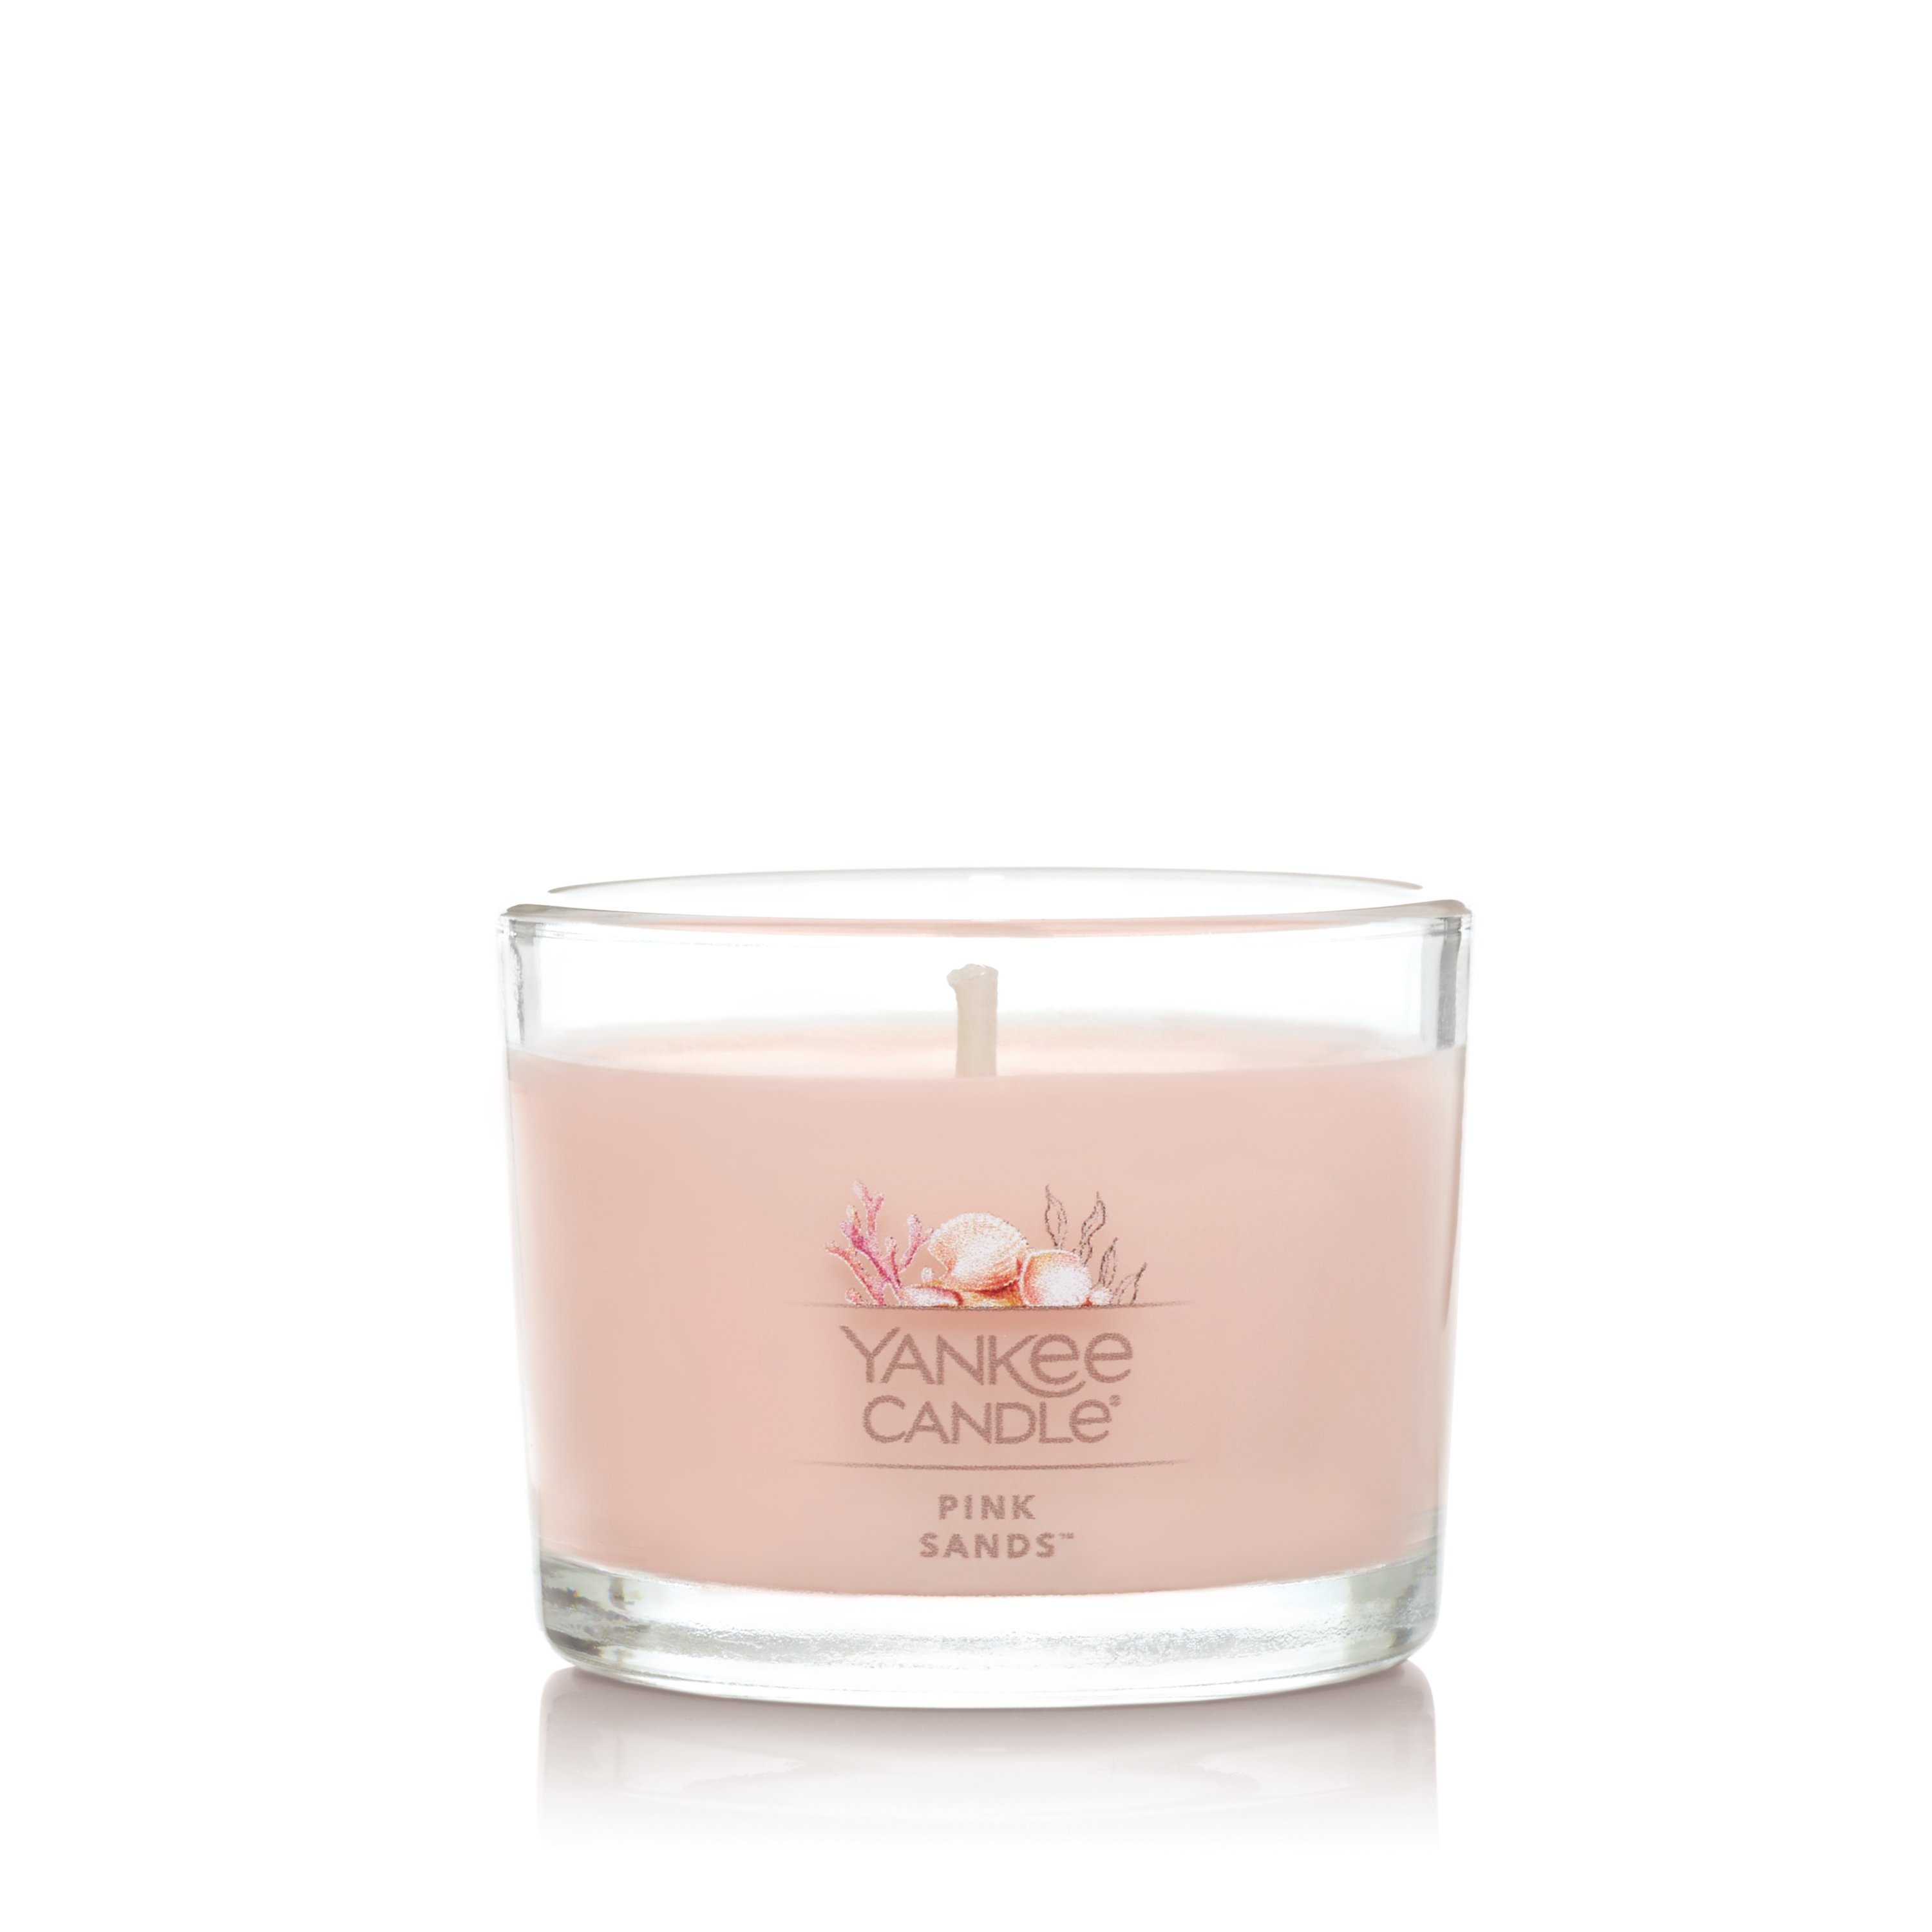 Yankee Candle Pink Sands 7 Oz Small Tumbler Candle